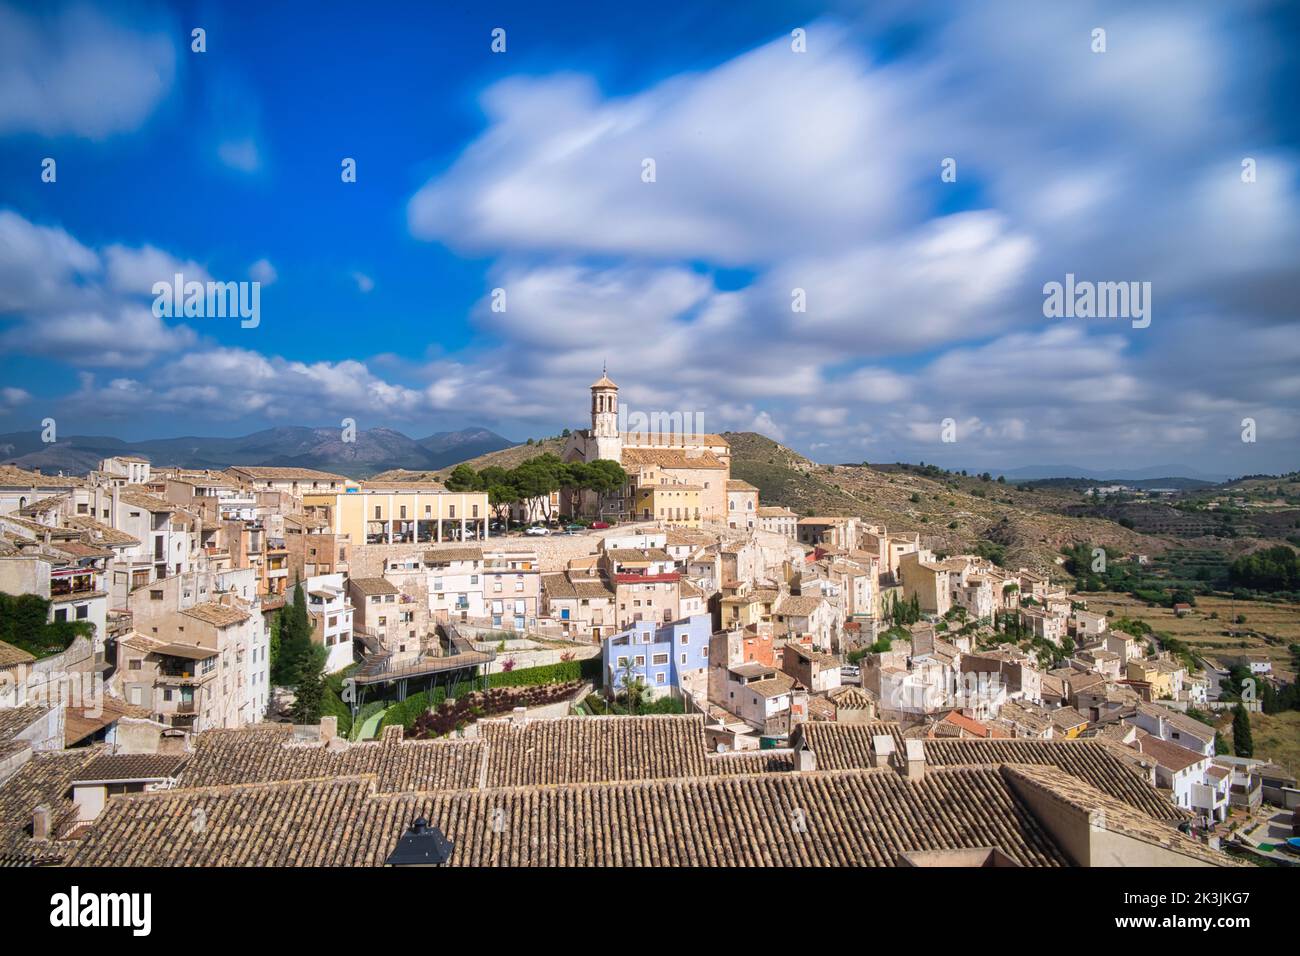 An aerial scenery of the cityscape of Cehegin, Spain Stock Photo